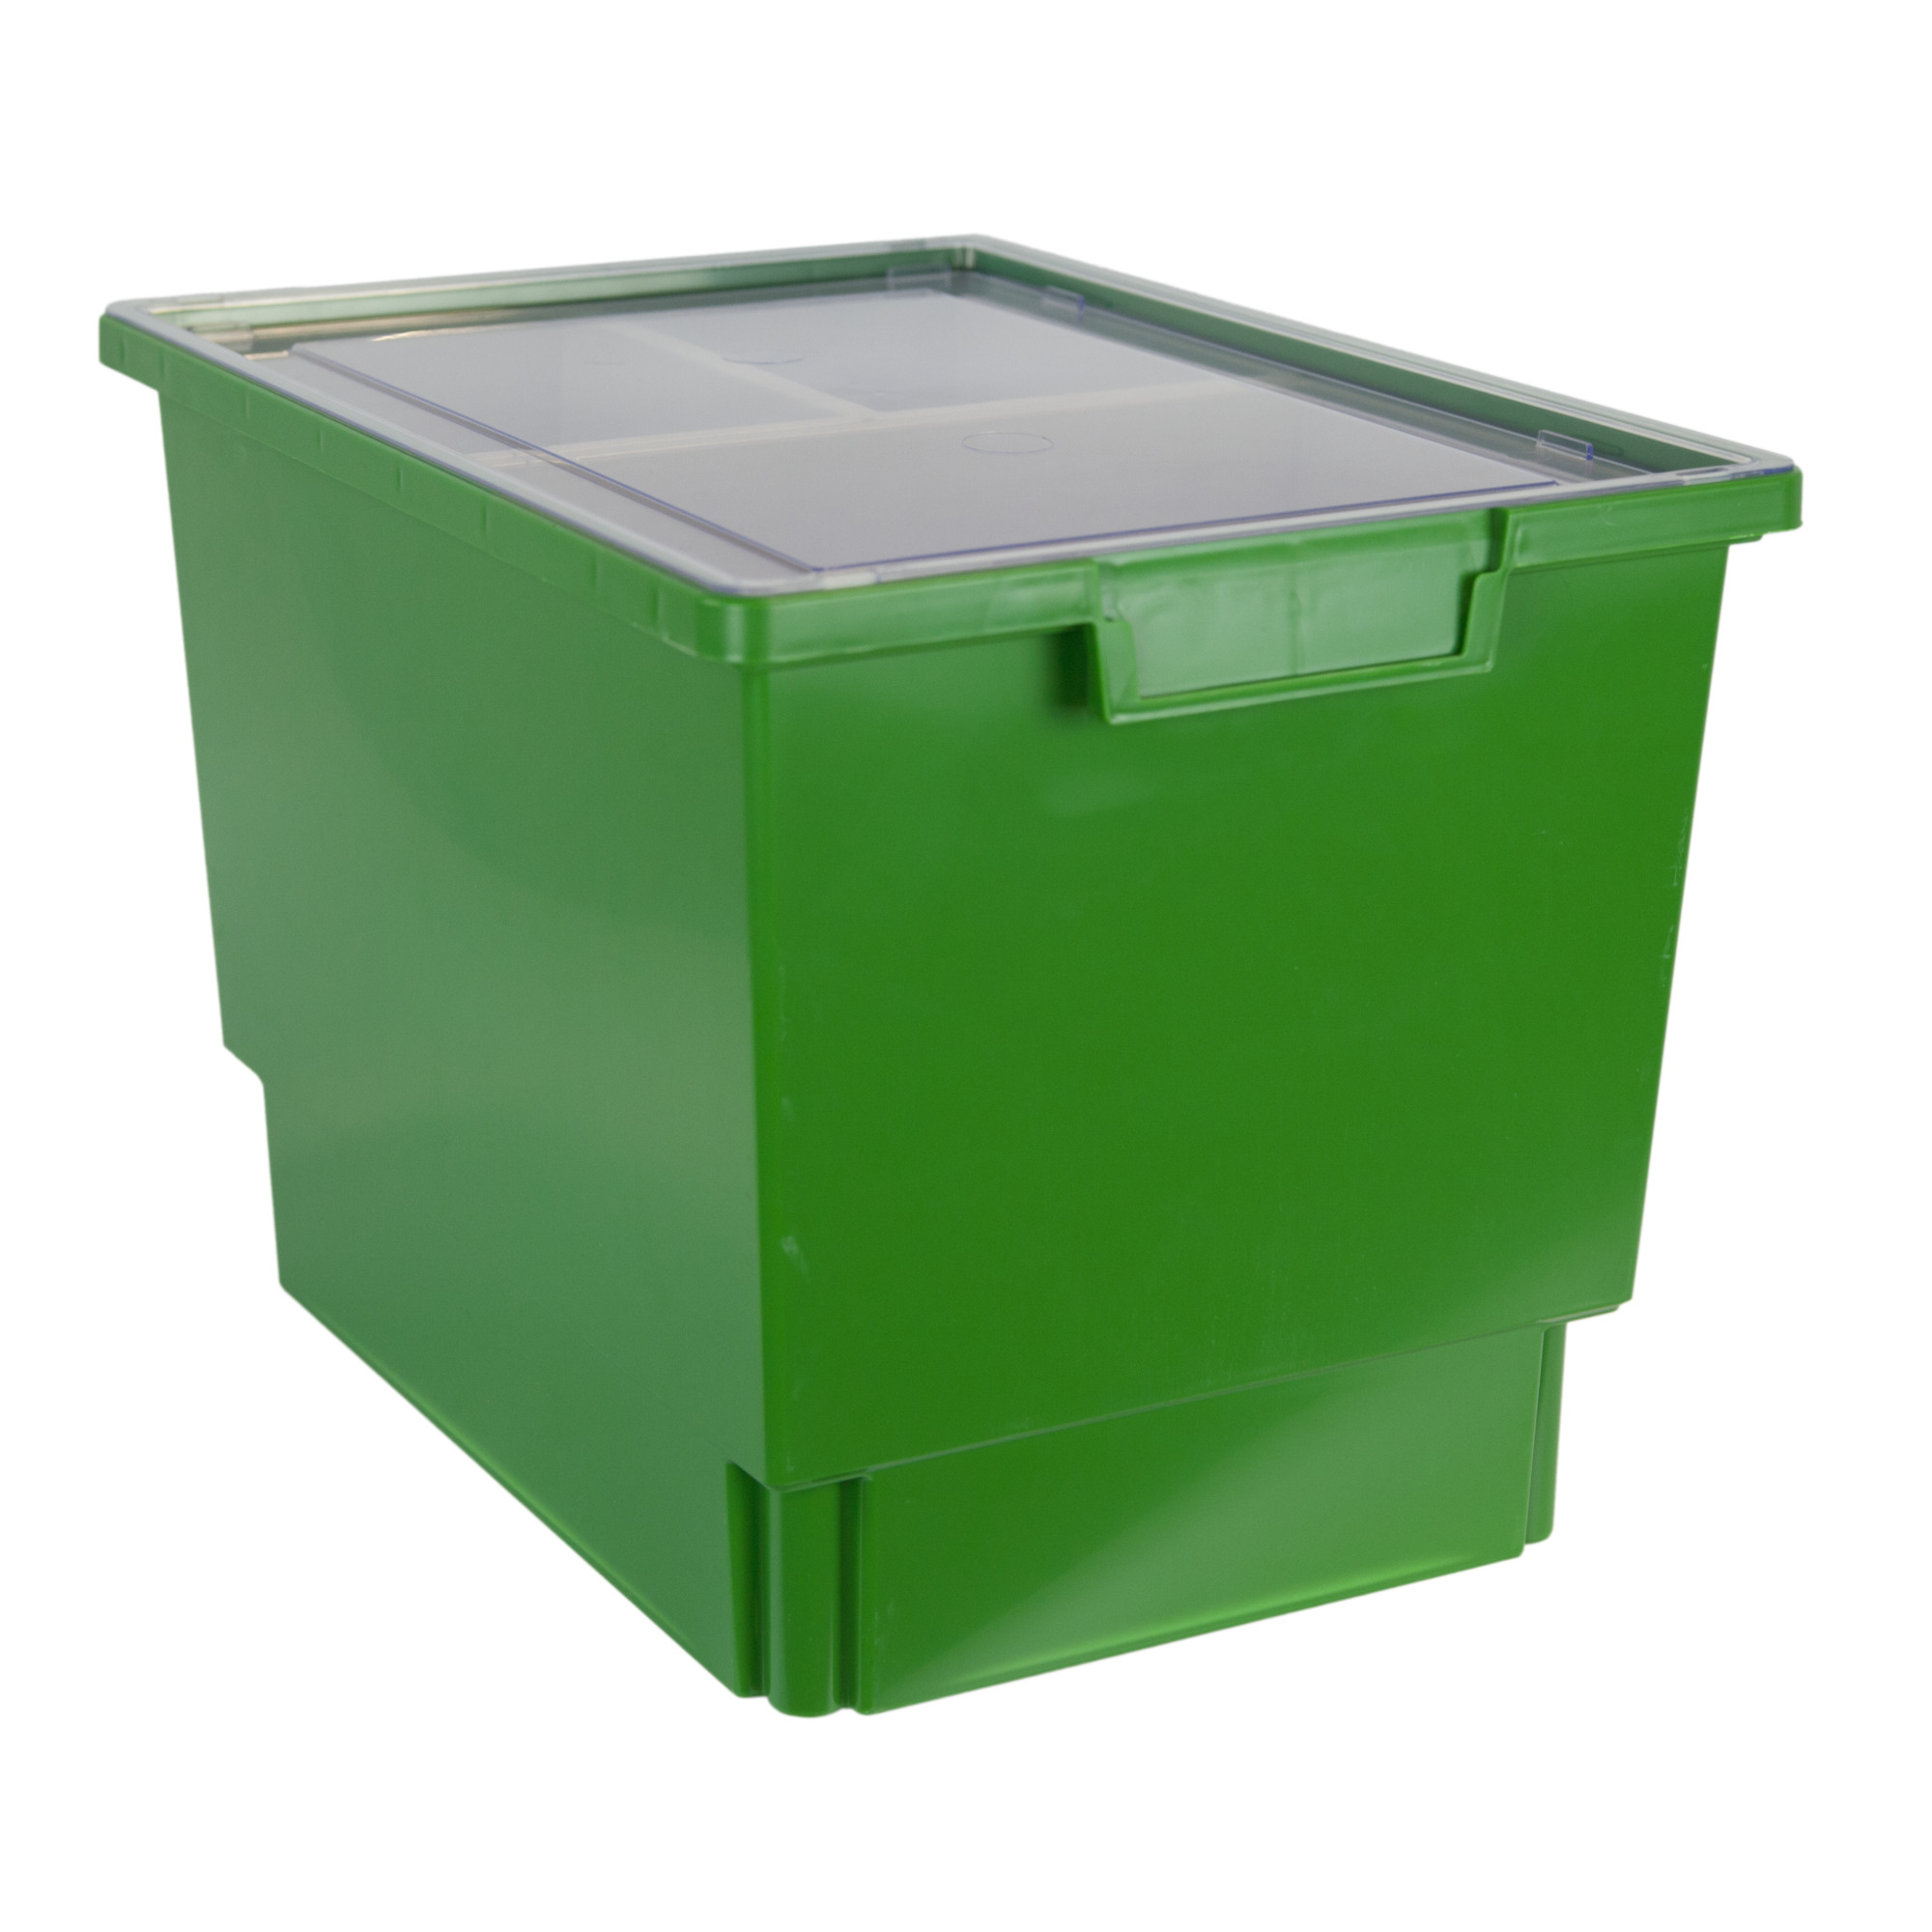 Certwood StorWerks, Slim Line 12Inch Tray Kit (3 x Divisions) Green, Included (qty.) 1, Material Plastic, Height 12 in, Model CE1954PG-NK0004-1